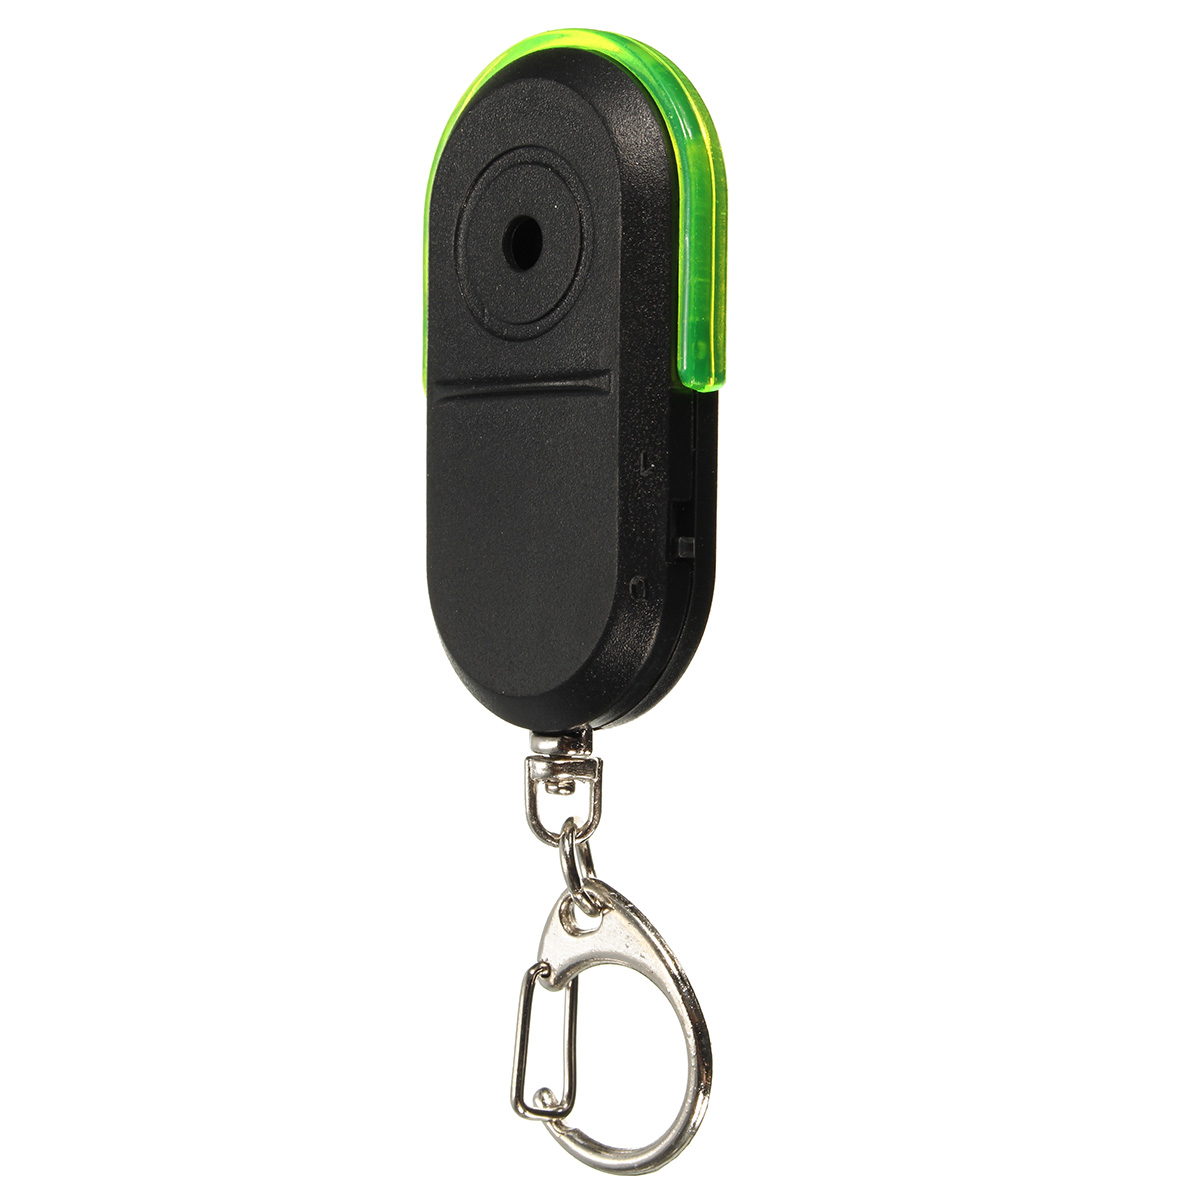 Wireless-Anti-Lost-Alarm-Key-Finder-Locator-Keychain-Whistle-Sound-with-LED-Light-1030593-9